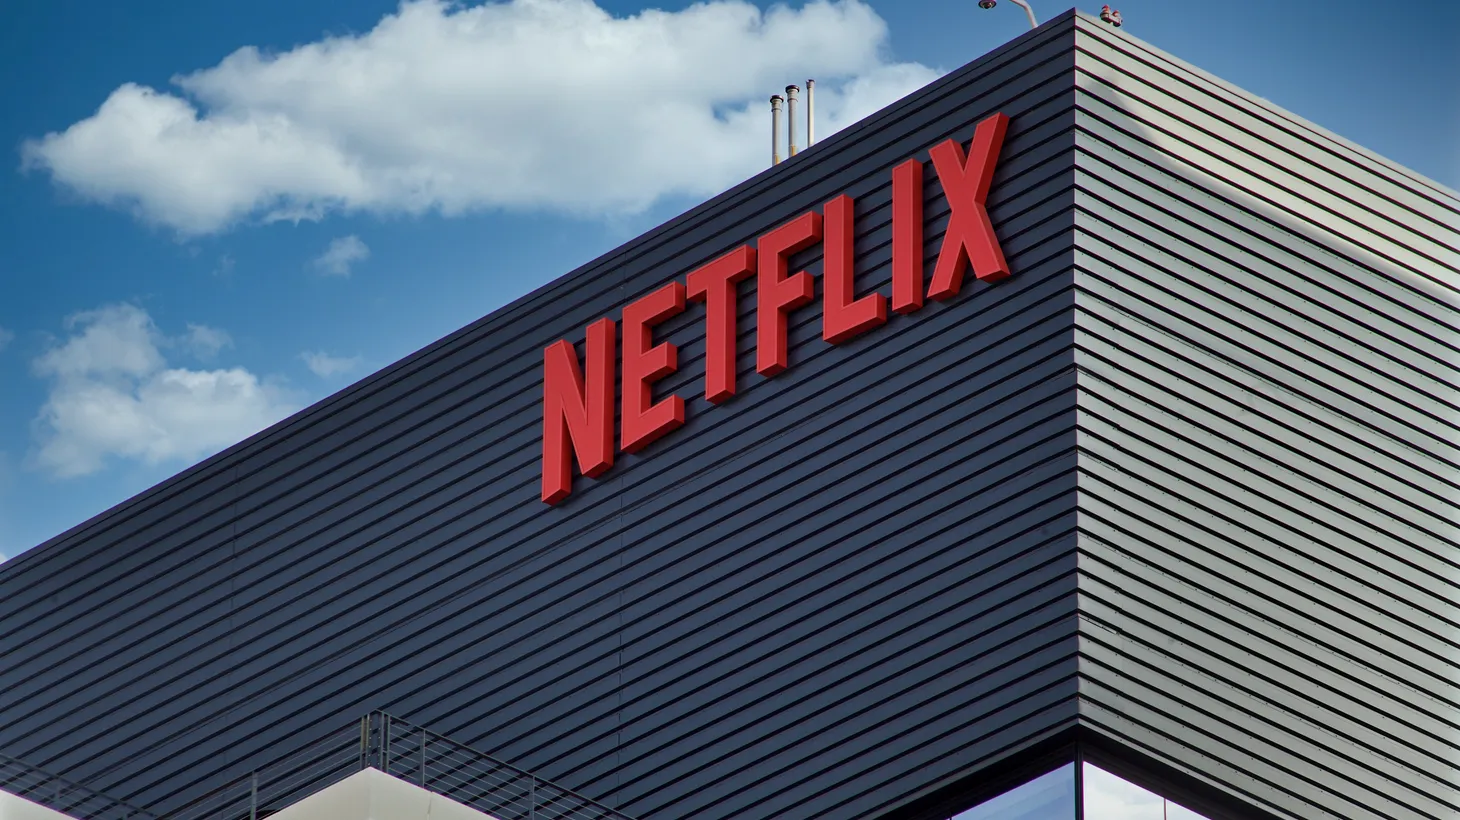 “We're left with ambiguity. Netflix is saying, ‘We're over the worst of it.’ It's a little unclear exactly how they're over the worst of it,” says Kim Masters.